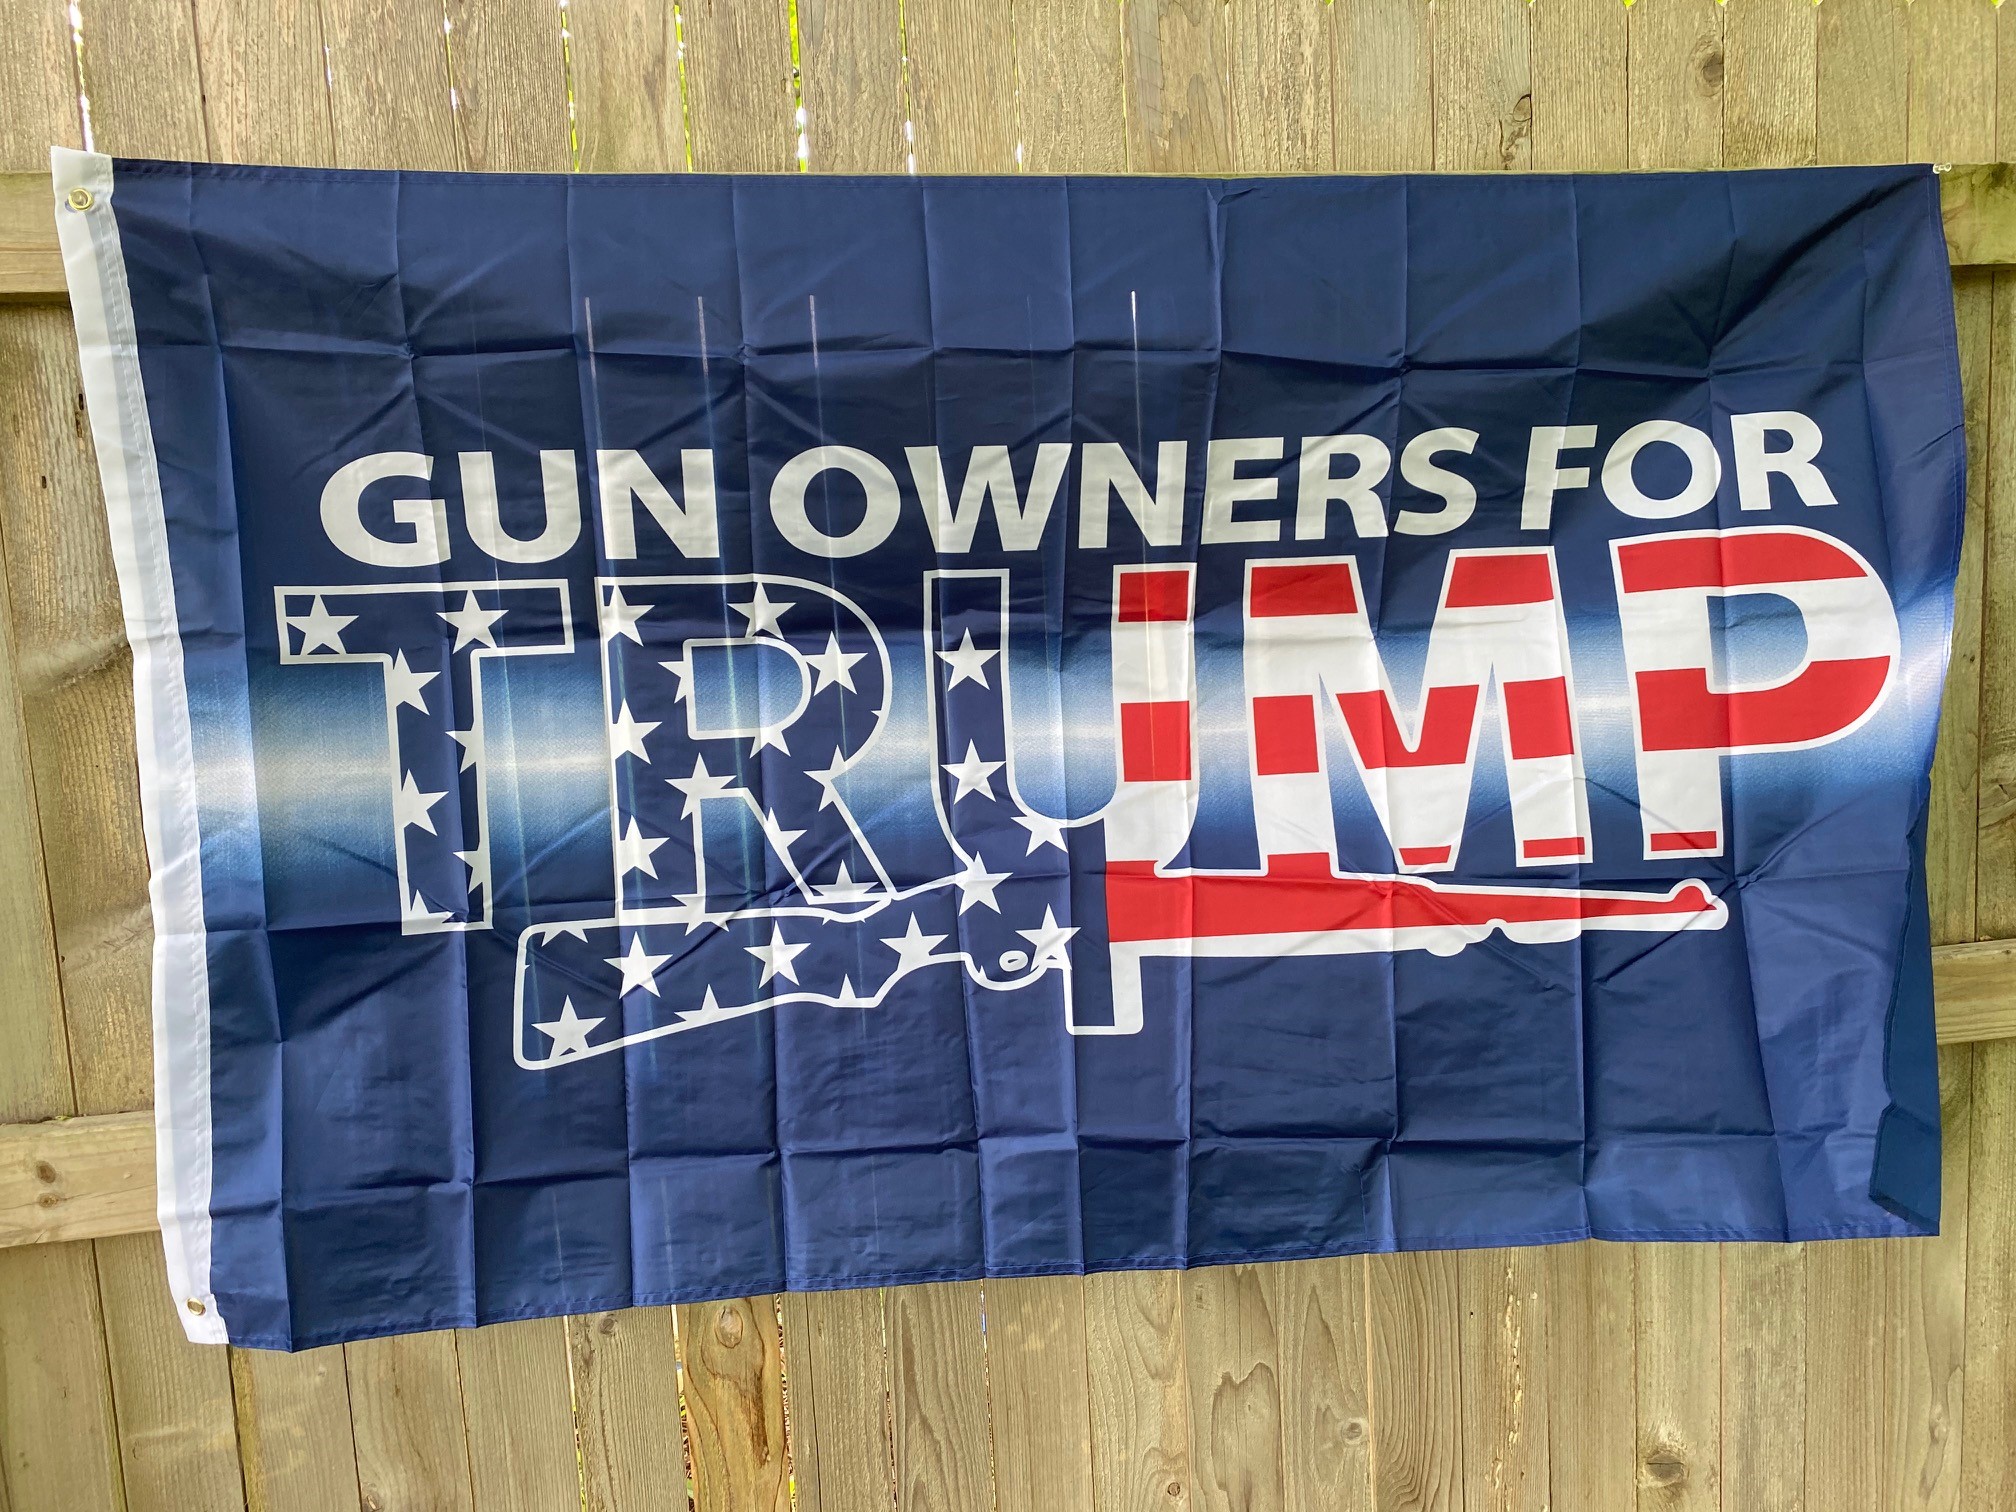 The Silent Majority STANDS WITH Trump Flag Trump 2020 Guns Poster 3x5FT banner 